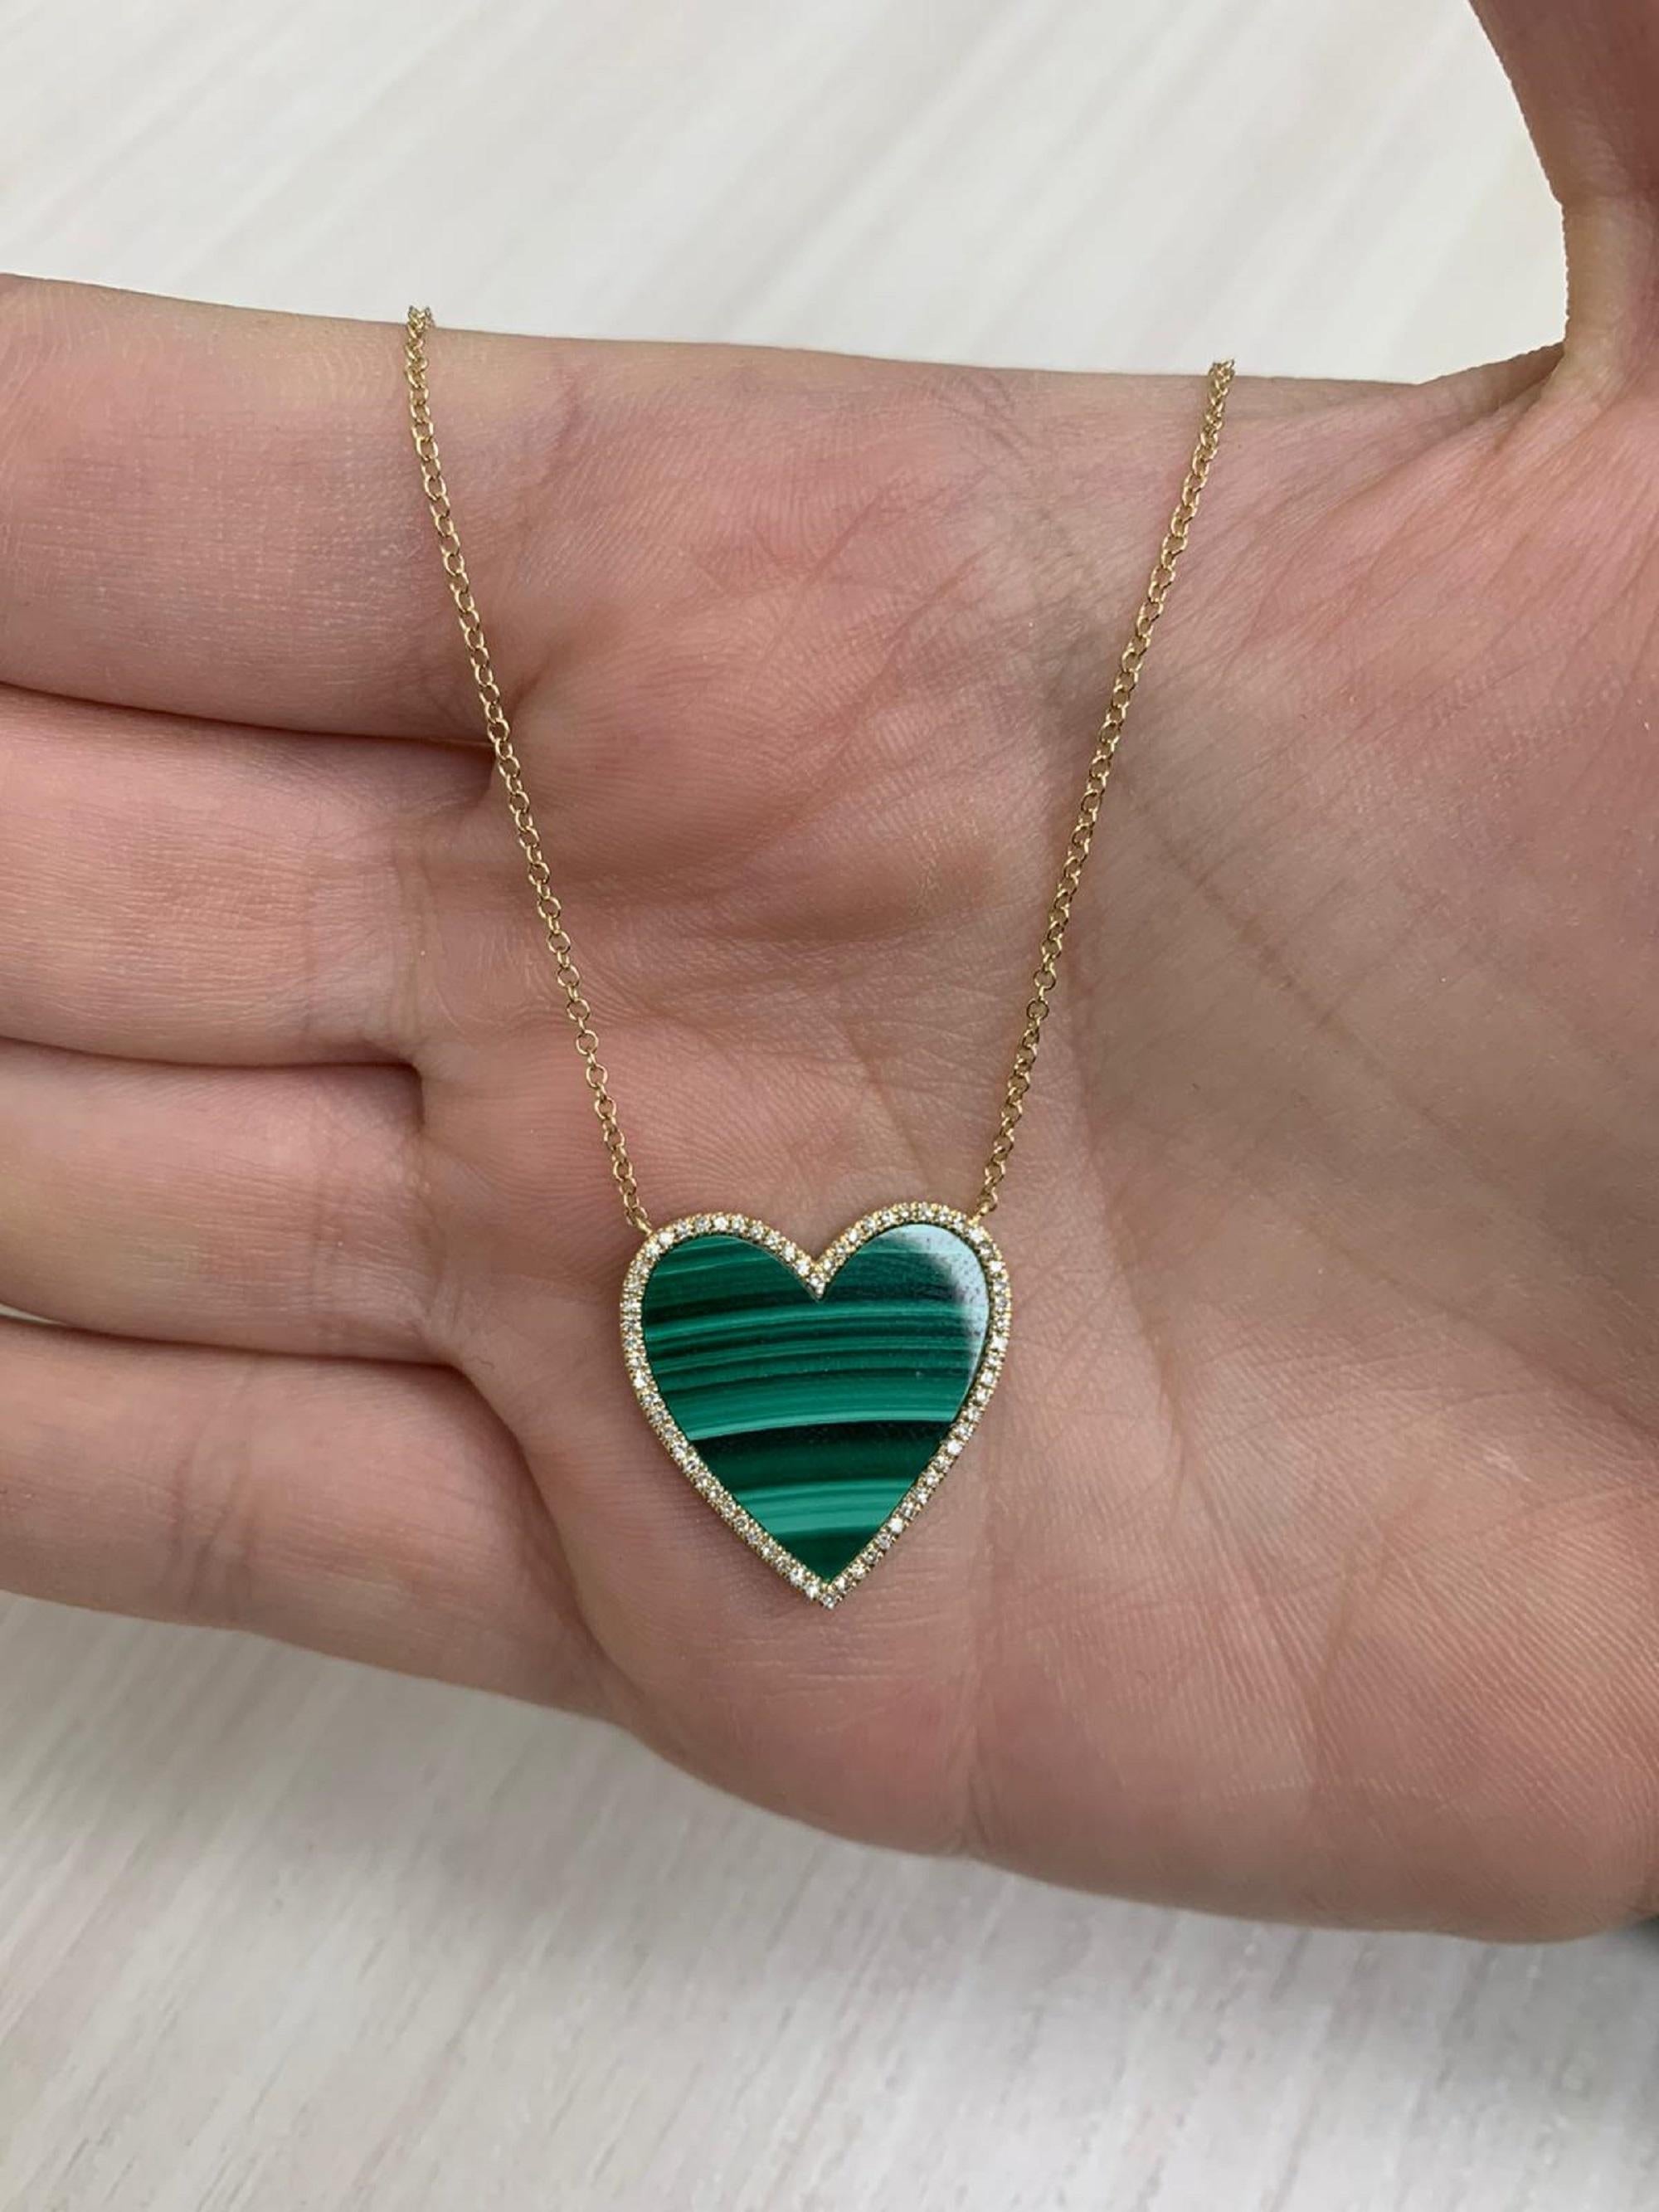 This is a Beautiful & Unique Heart Necklace crafted of 14K Yellow Gold and features 1 Heart Shaped Malachite 4.46 carats and is surrounded by 0.15 carats of Natural Round White Diamonds hangs on an 16